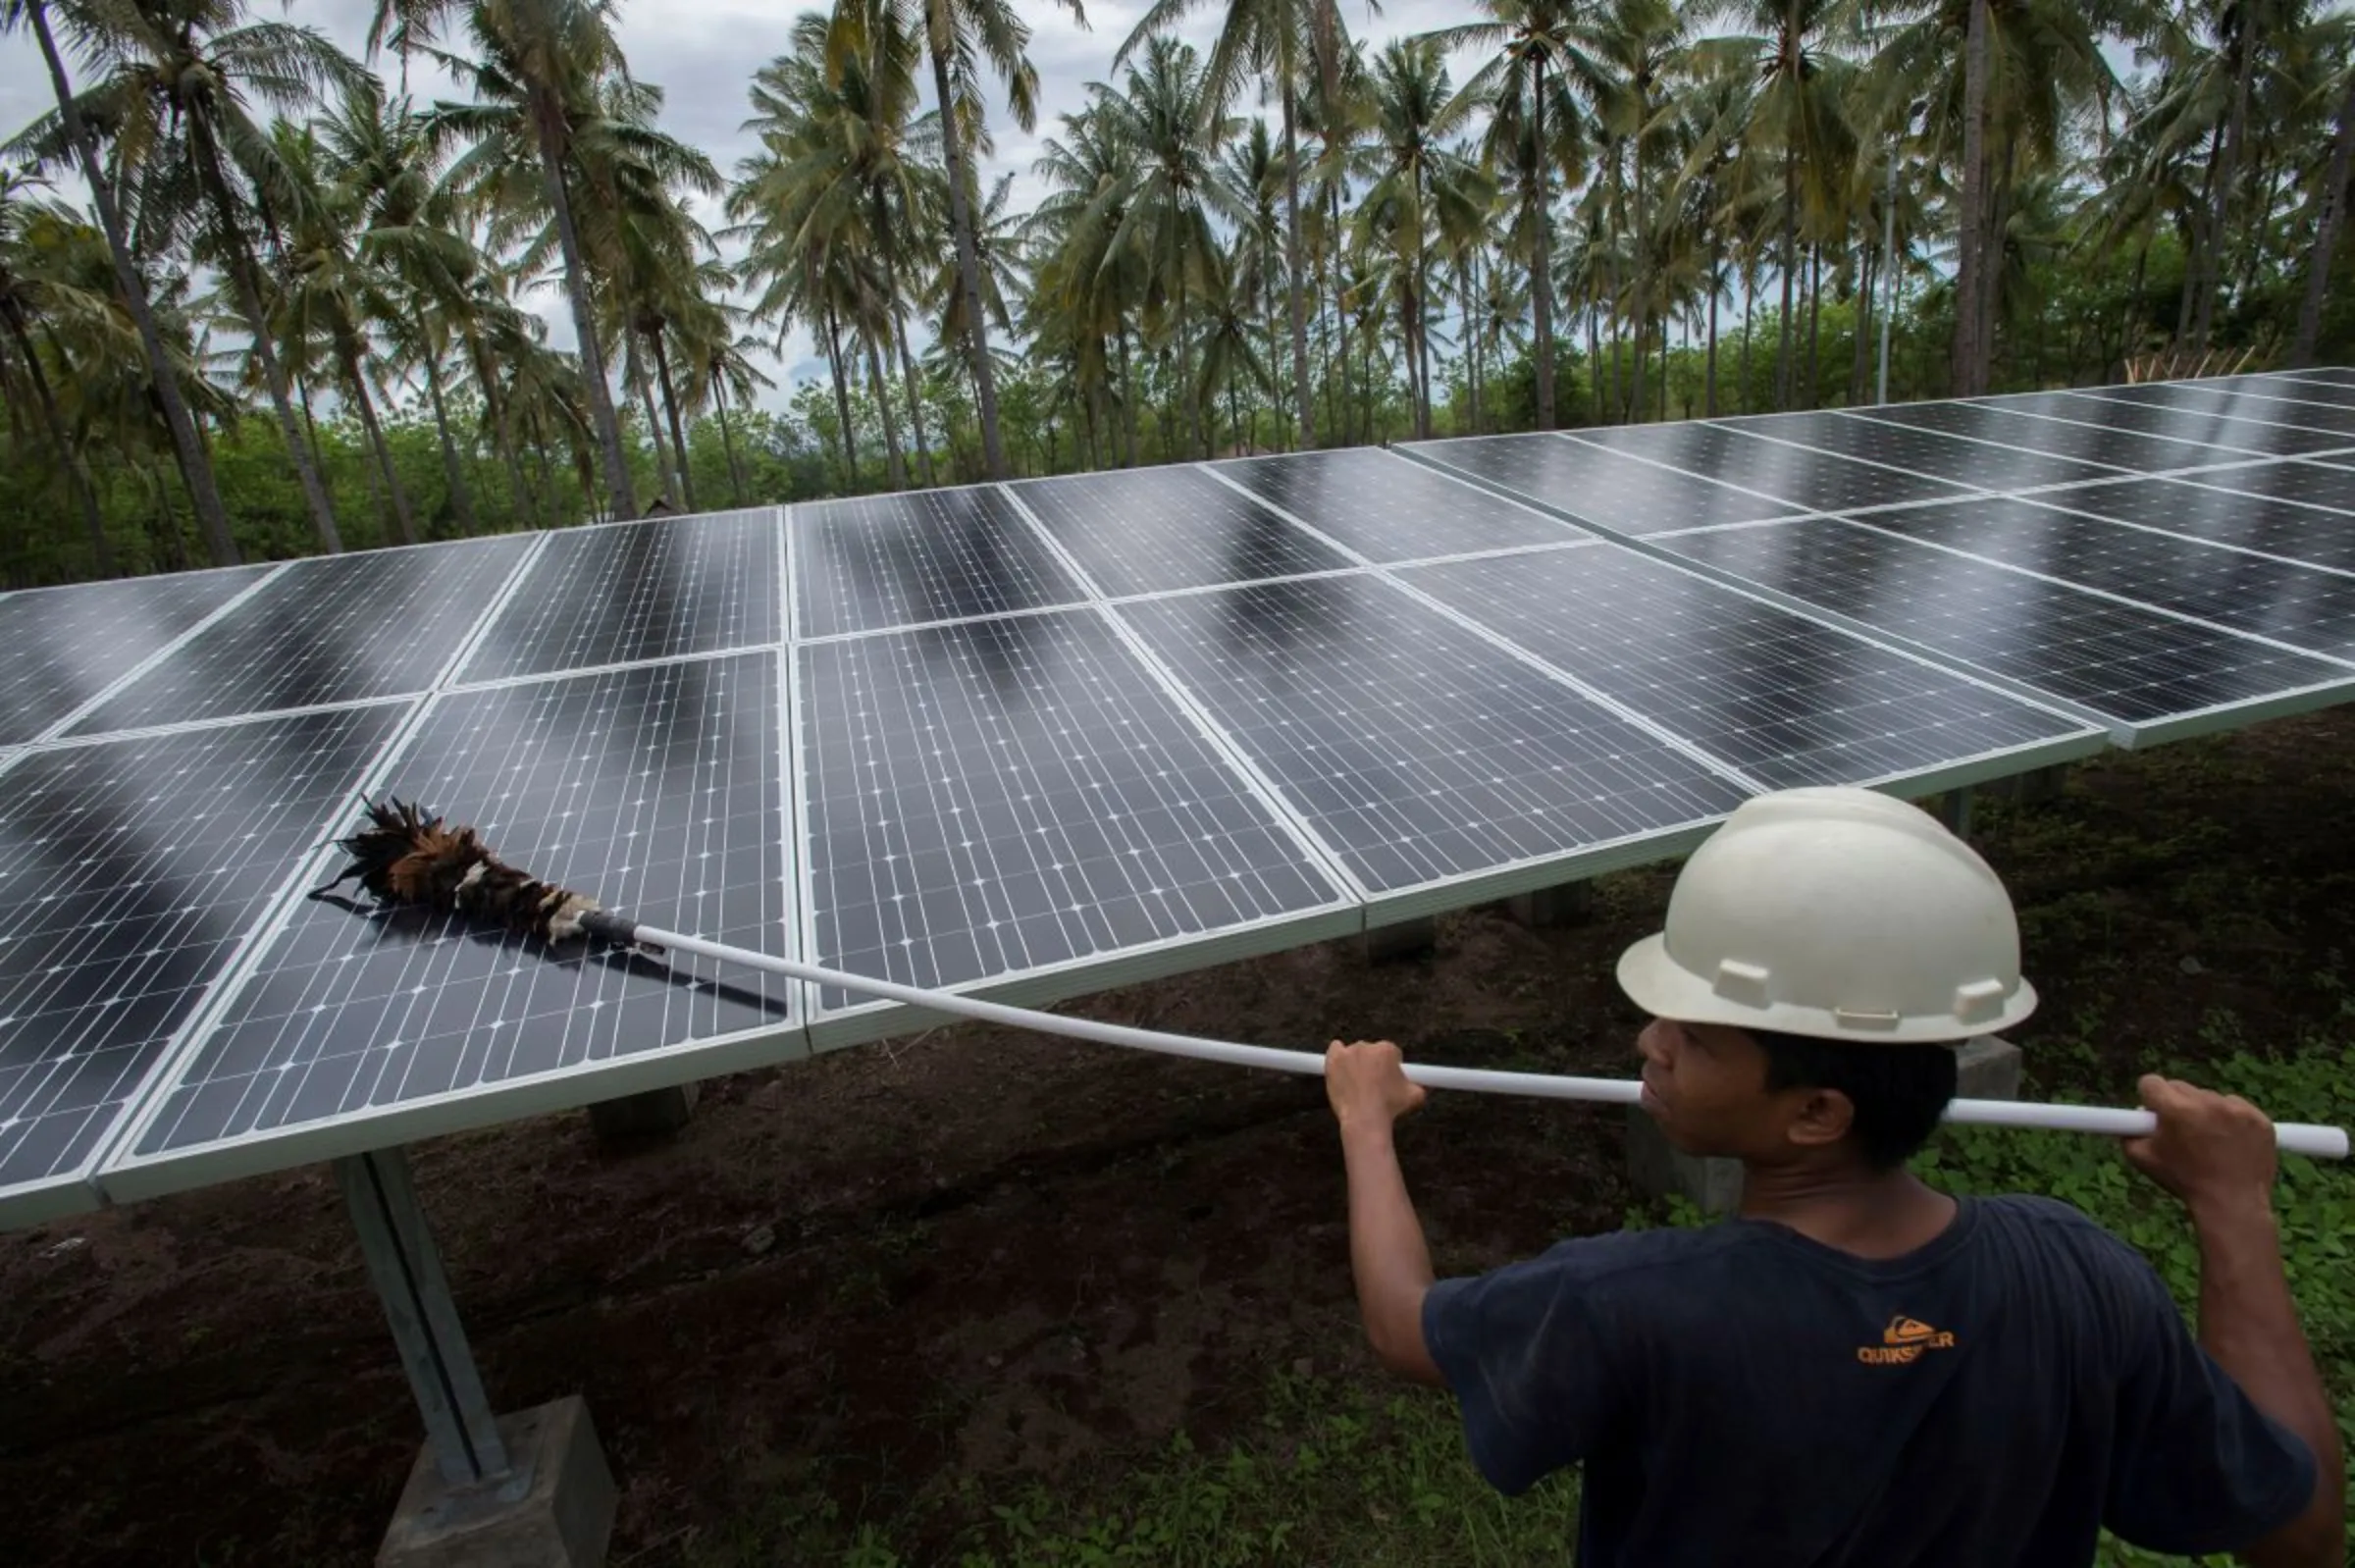 An employee of PT Perusahaan Listrik Negara (PLN) cleans the surface of solar panels at a solar power generation plant in Gili Meno island, Indonesia, December 9, 2014